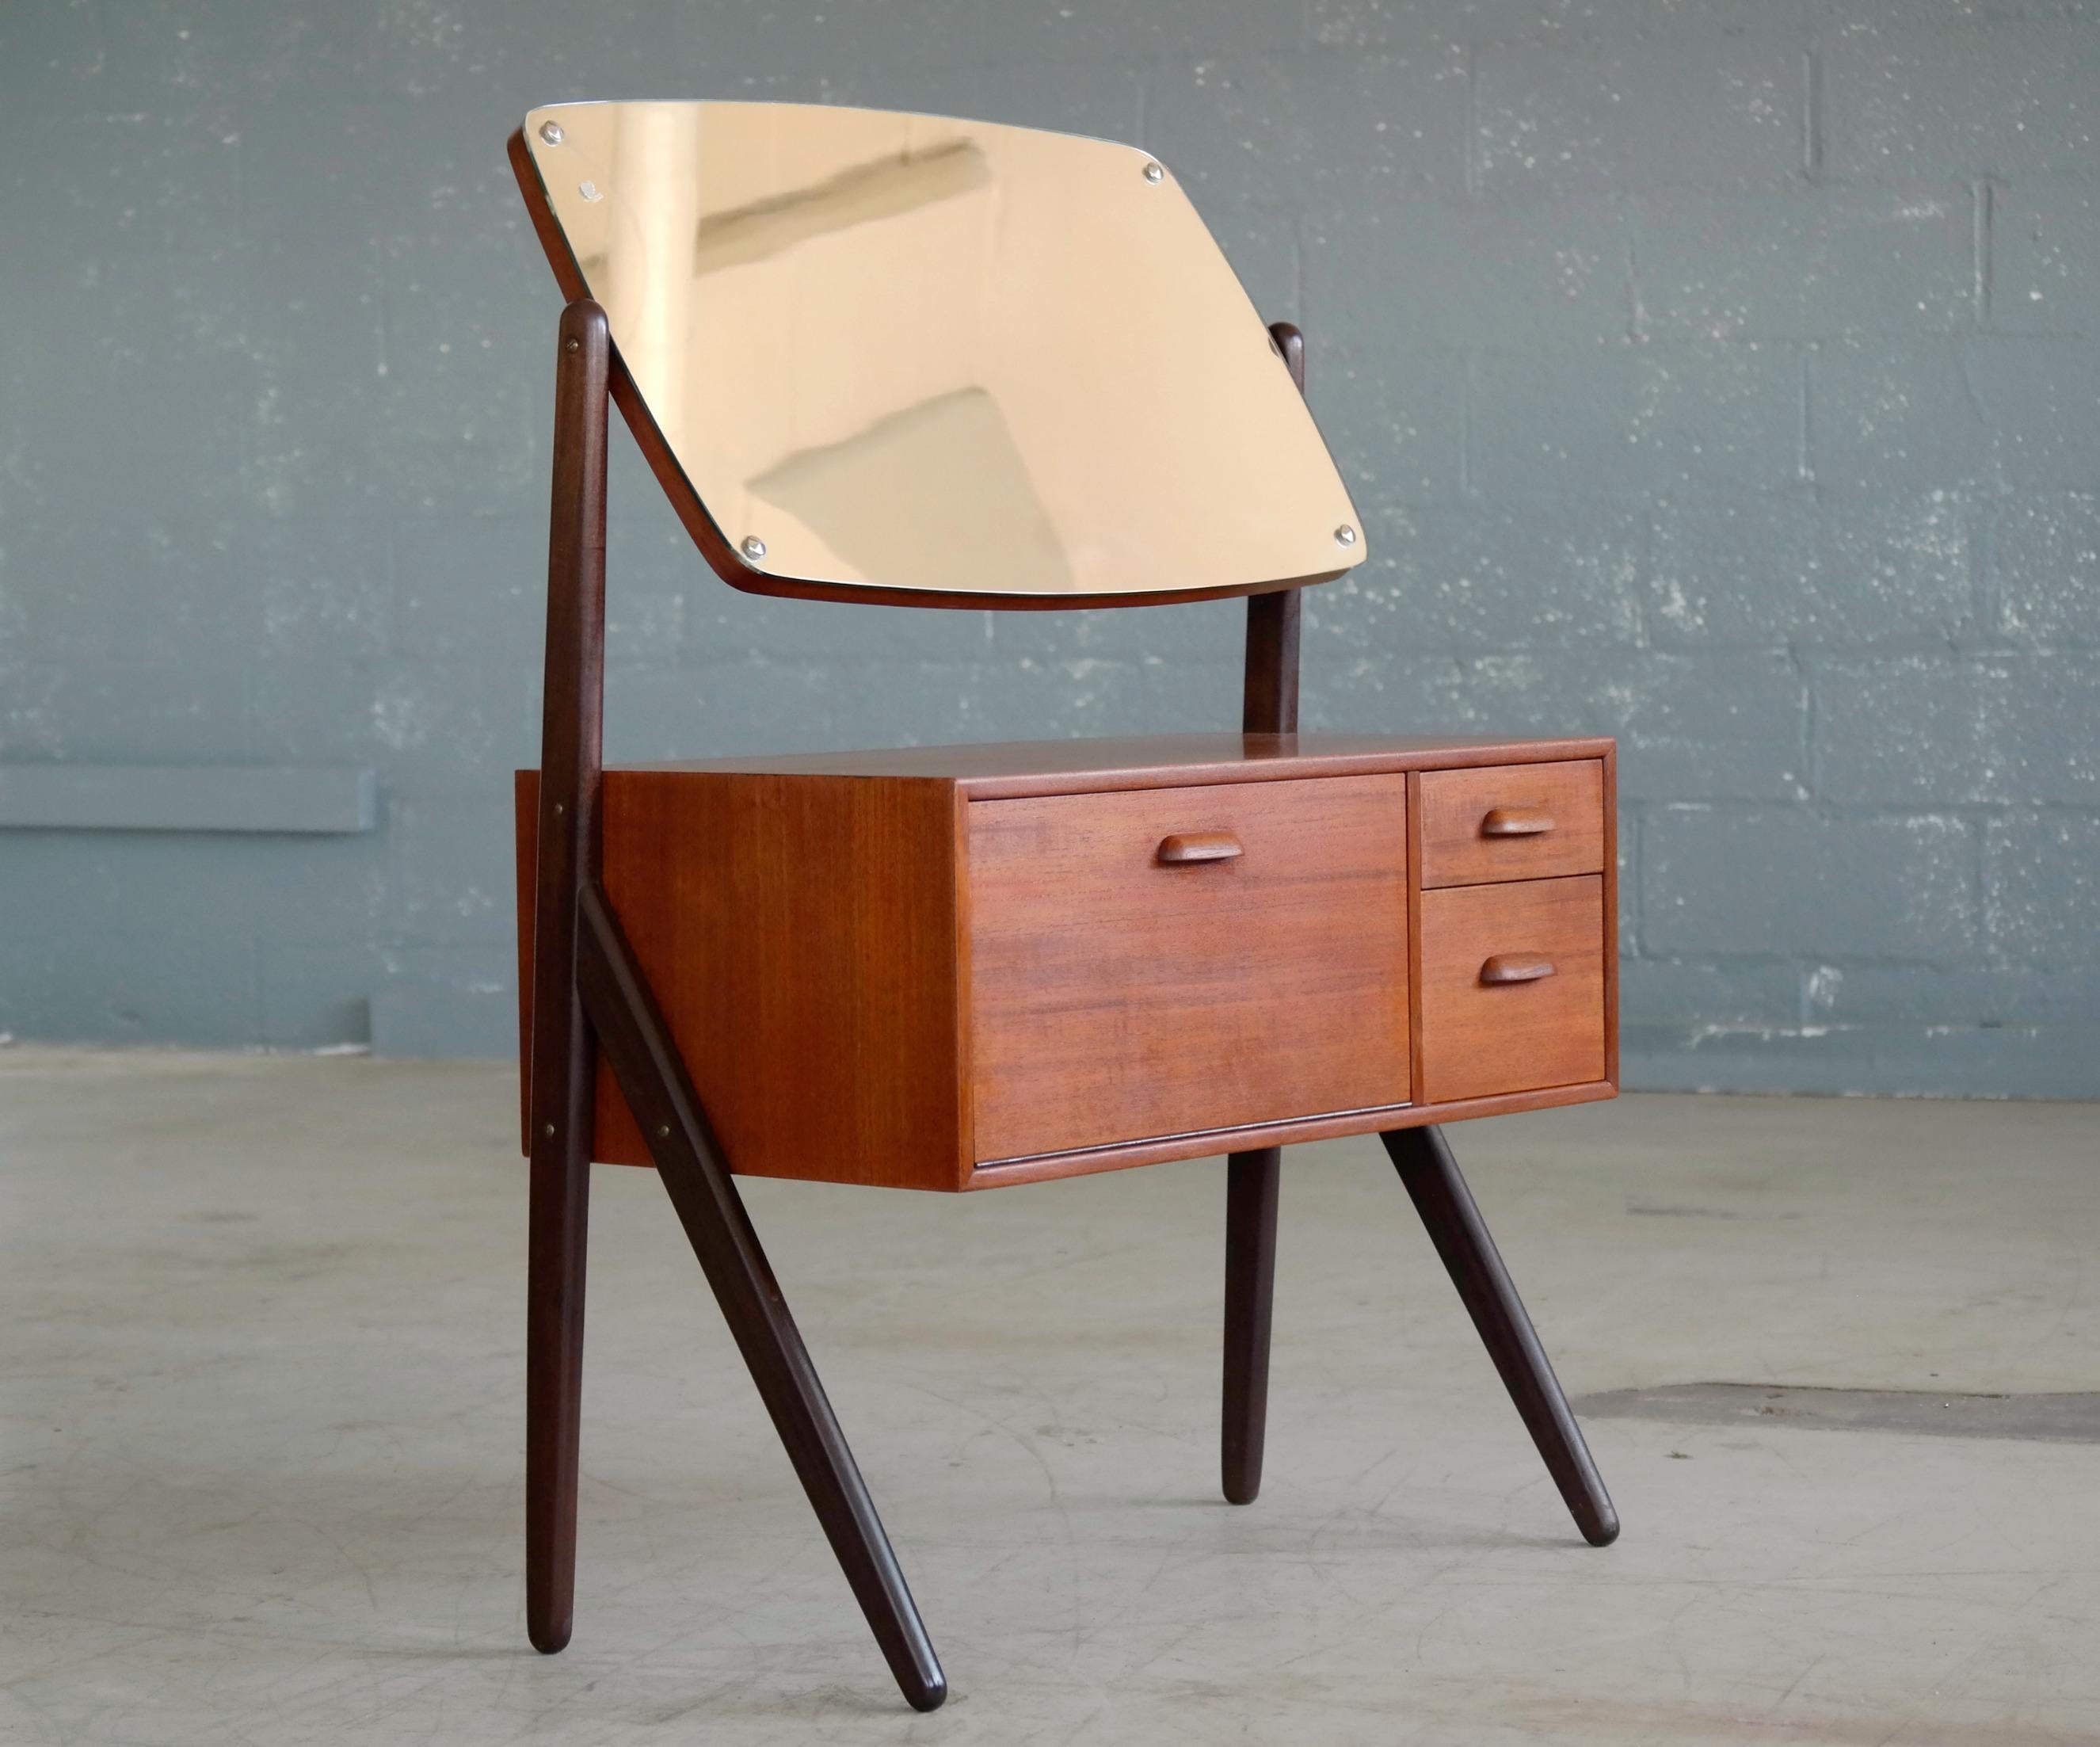 Elegant and very versatile vanity table with mirror made of solid teak and teak veneer and drawers of solid ply. Designed by Sigfred Omann and manufactured by Olholm Mobelfabrik in the early 1960s. Makers stamp on the back. Overall high quality and